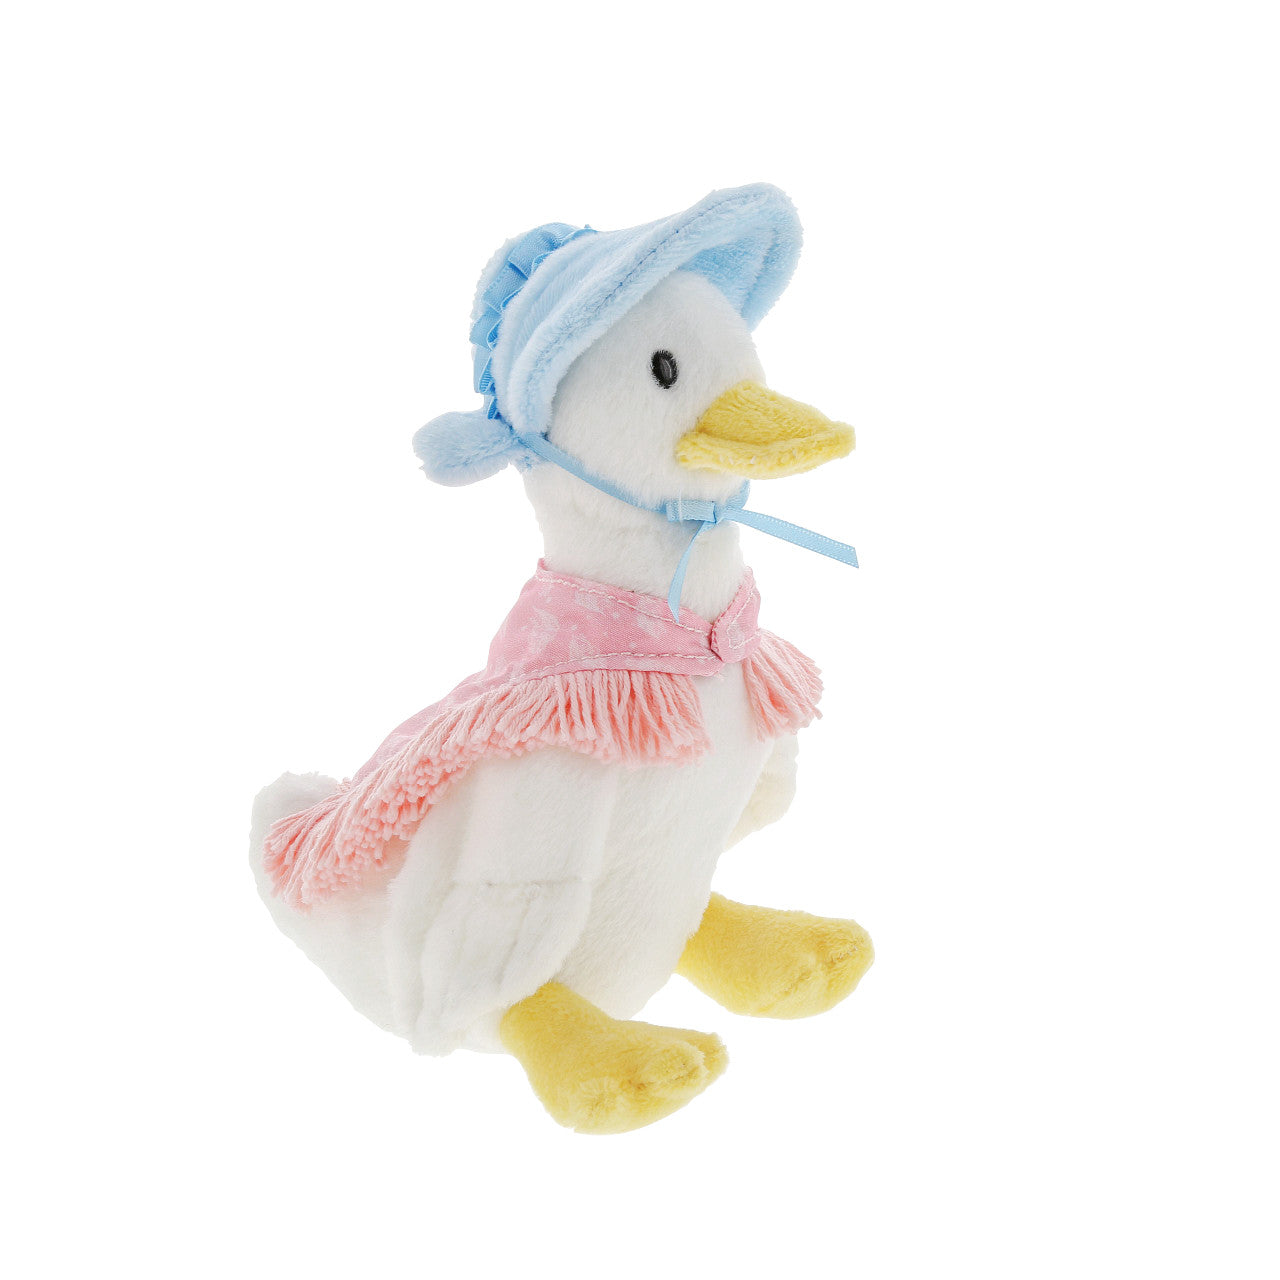 Jemima Puddle-duck (Small)